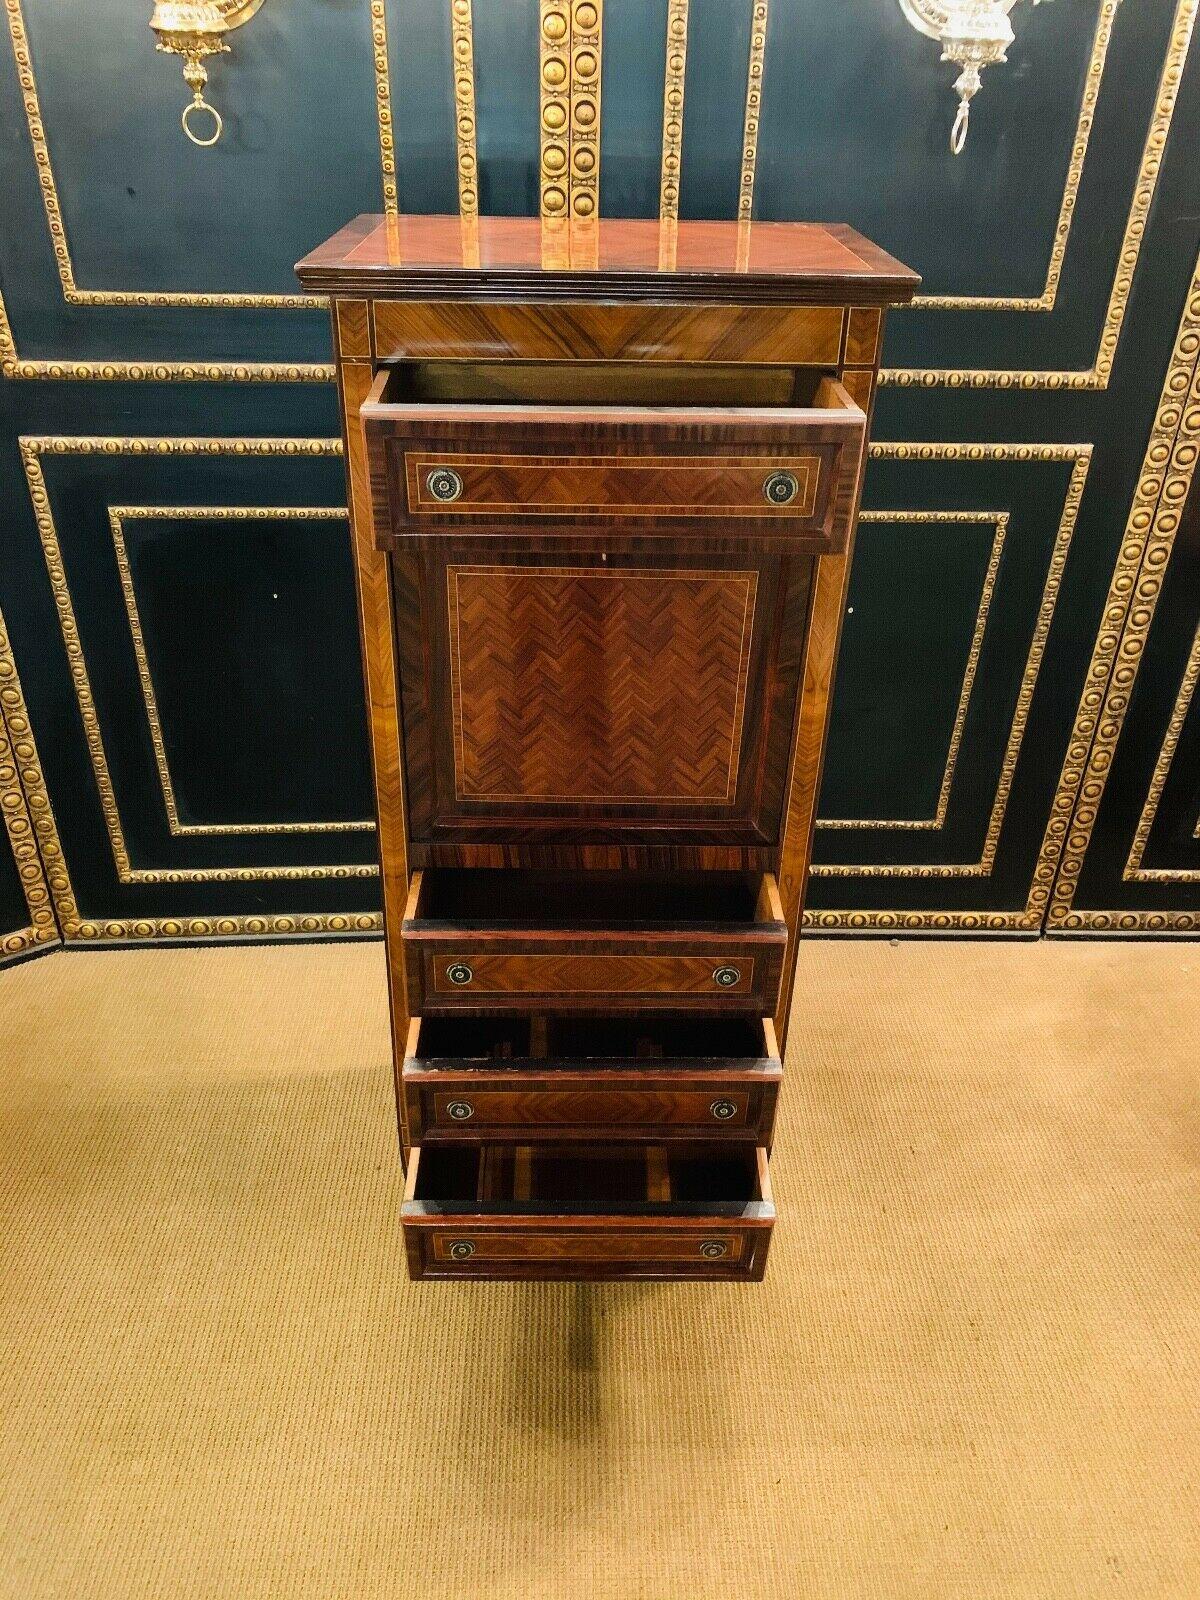 Veneer on solid softwood.

Rectangular body on pointed legs.

Straight flap in the front between four drawers.

Rich office layout behind.

The sides and the front have framed panels.

Adorned with parquet-like marquetry.